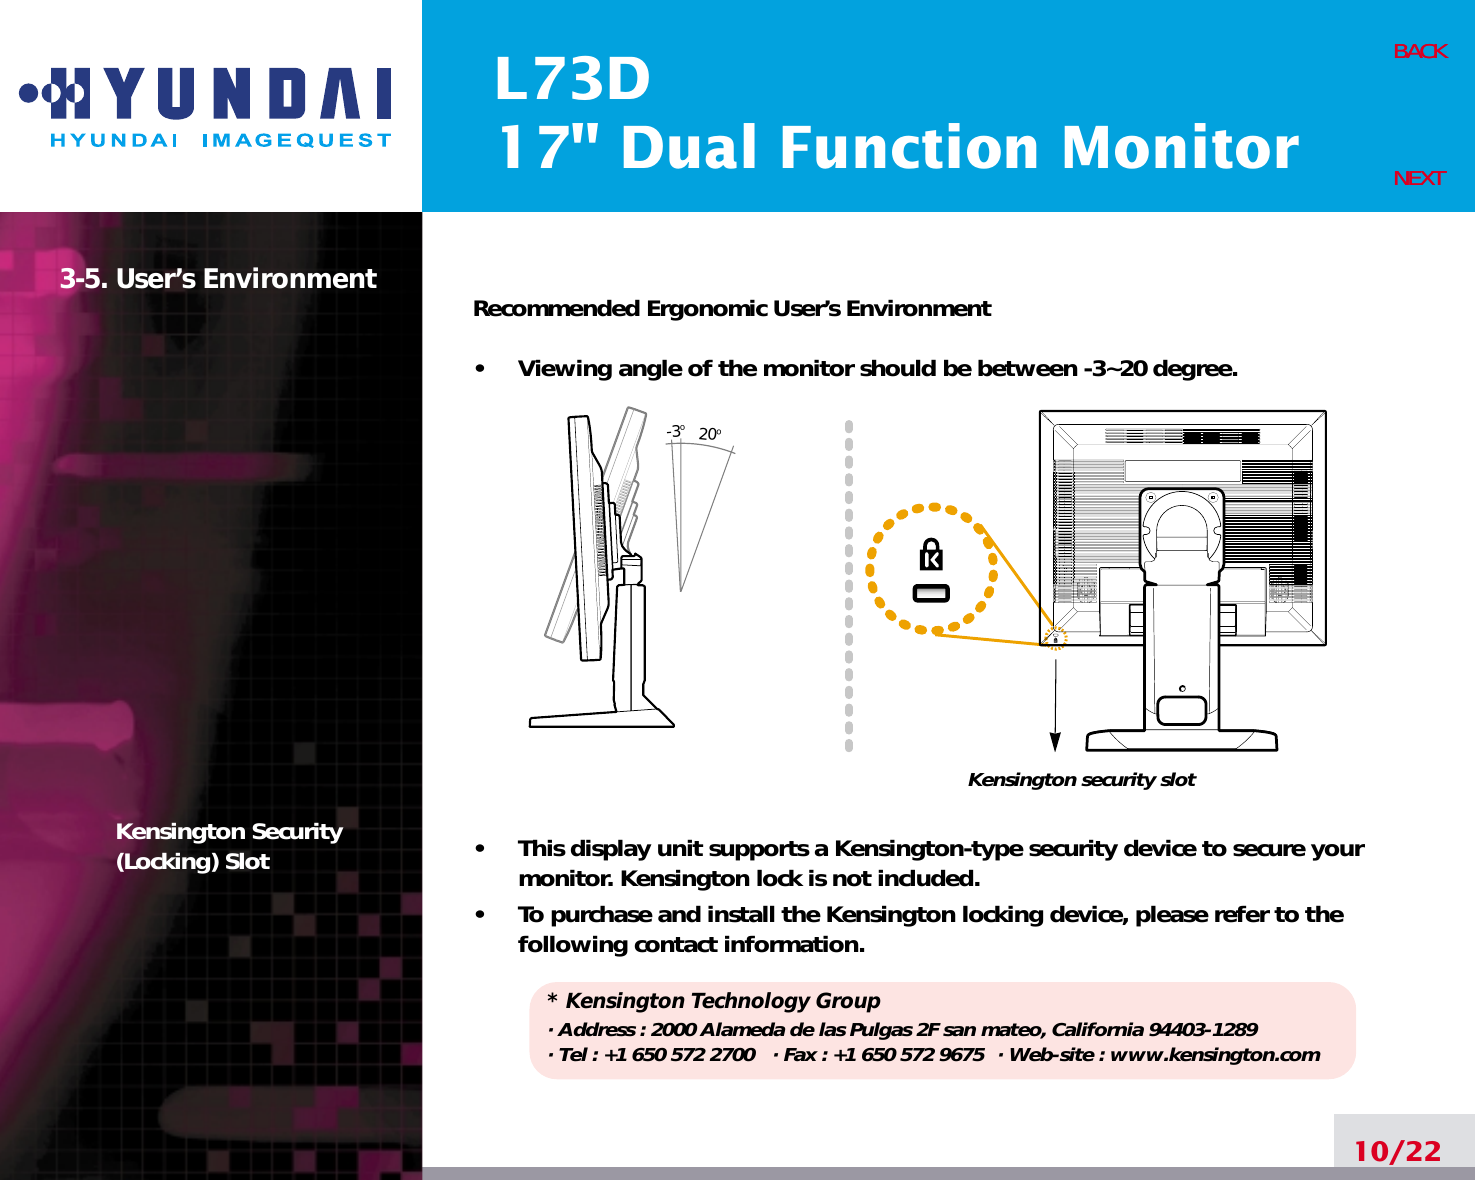 L73D17&quot; Dual Function Monitor10/22BACKNEXT3-5. User’s EnvironmentKensington Security(Locking) SlotRecommended Ergonomic User’s Environment•     Viewing angle of the monitor should be between -3~20 degree.•     This display unit supports a Kensington-type security device to secure yourmonitor. Kensington lock is not included.•     To purchase and install the Kensington locking device, please refer to thefollowing contact information.* Kensington Technology Group· Address : 2000 Alameda de las Pulgas 2F san mateo, California 94403-1289· Tel : +1 650 572 2700 · Fax : +1 650 572 9675 · Web-site : www.kensington.comBACKNEXT20o-3oKensington security slot